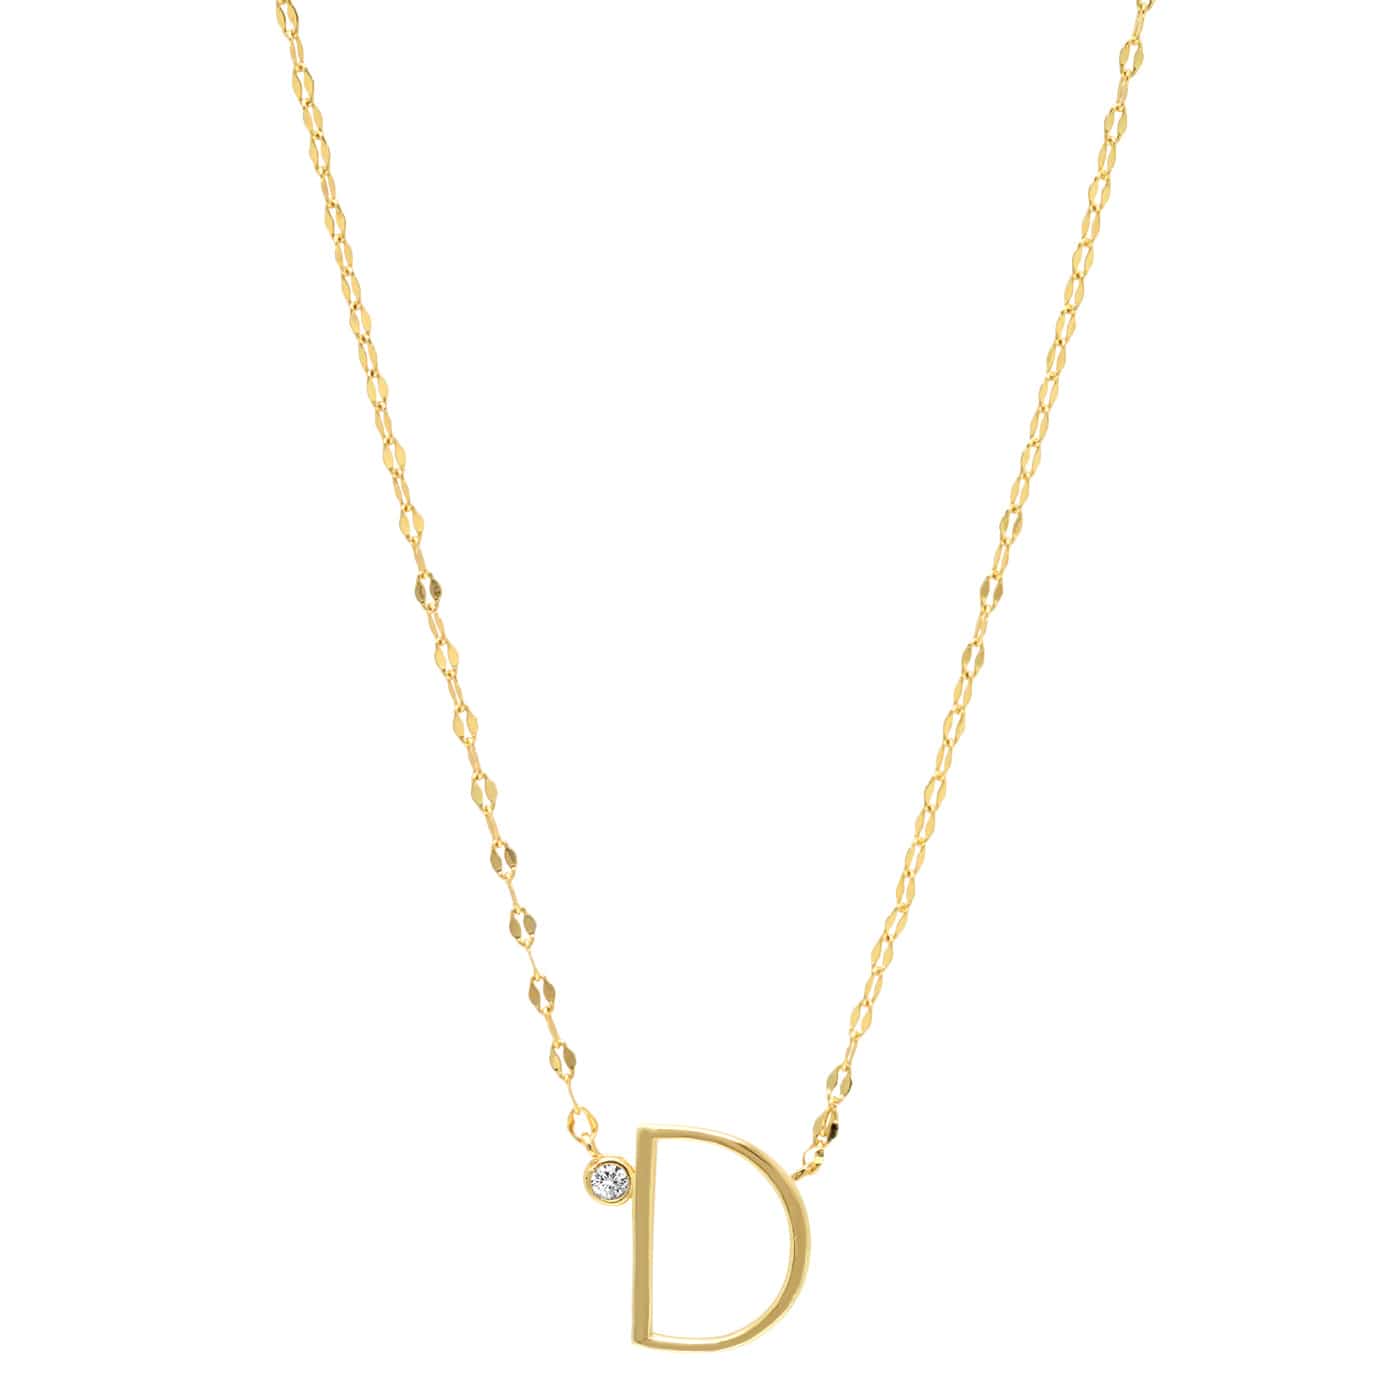 TAI JEWELRY Necklace D Medium Sized Initial Necklace With Cz Accent